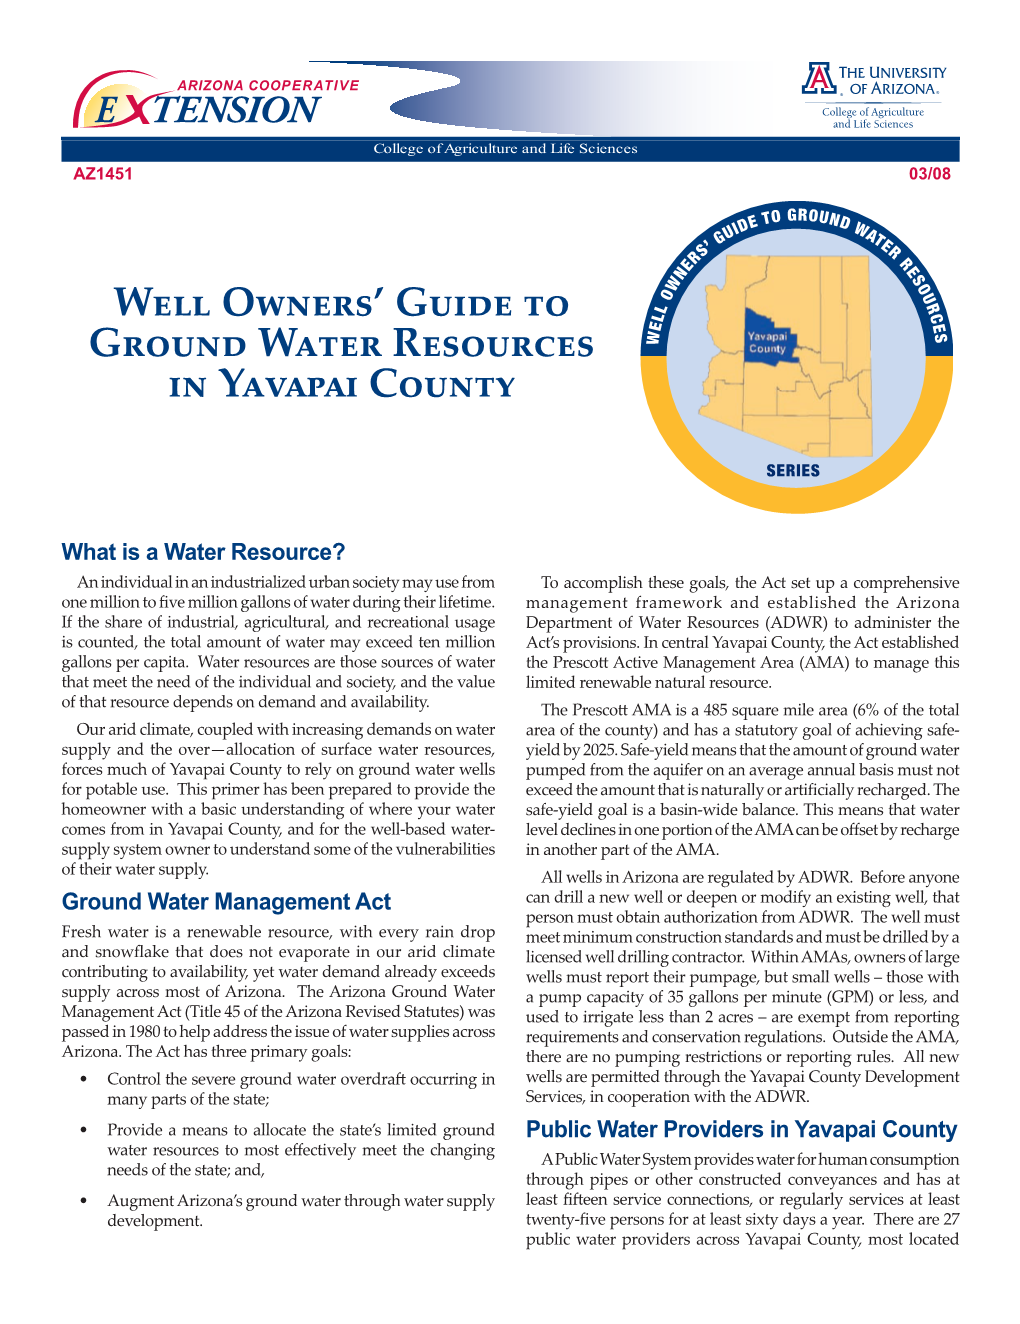 Well Owners' Guide to Ground Water Resources in Yavapai County